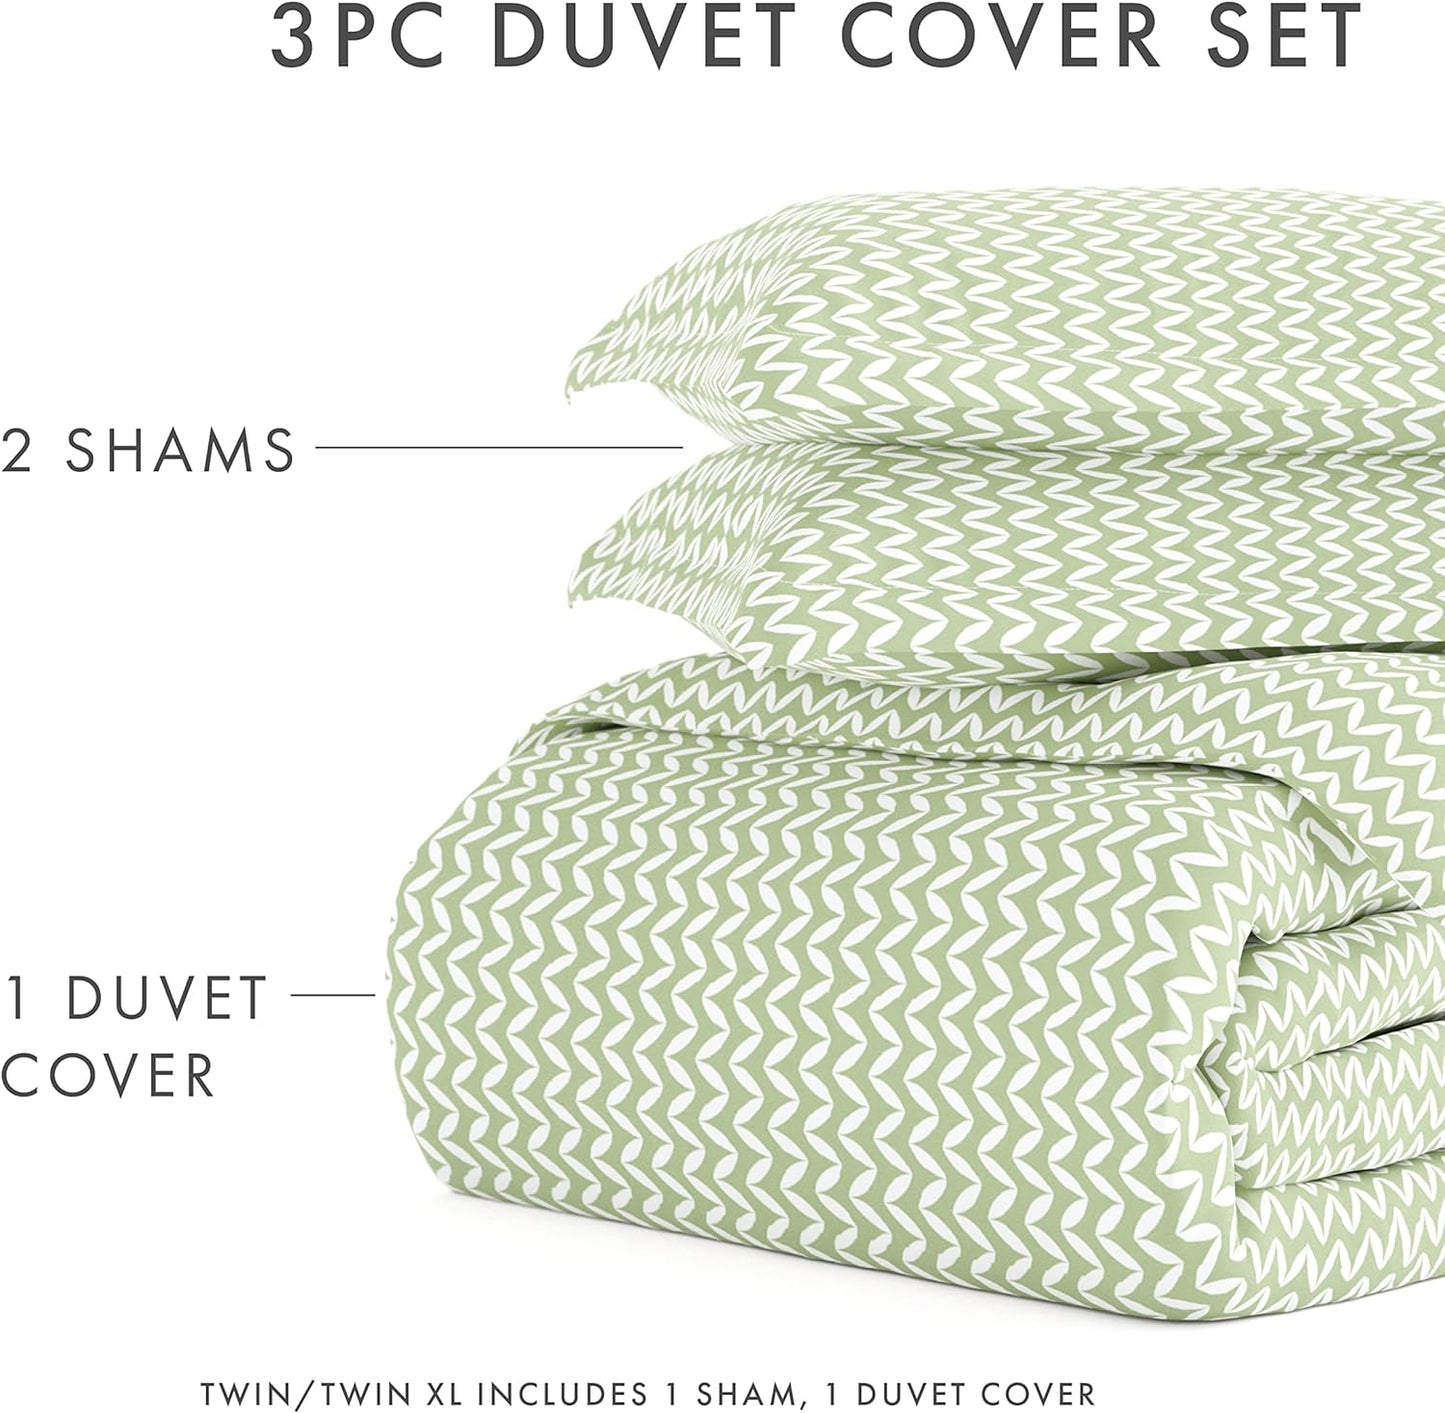 Linen Market Duvet Cover Queen (Sage) - Experience Hotel-Like Comfort with Unparalleled Softness, Exquisite Prints & Solid Colors for a Dreamy Bedroom - Queen Duvet Cover Set with 2 Pillow Shams